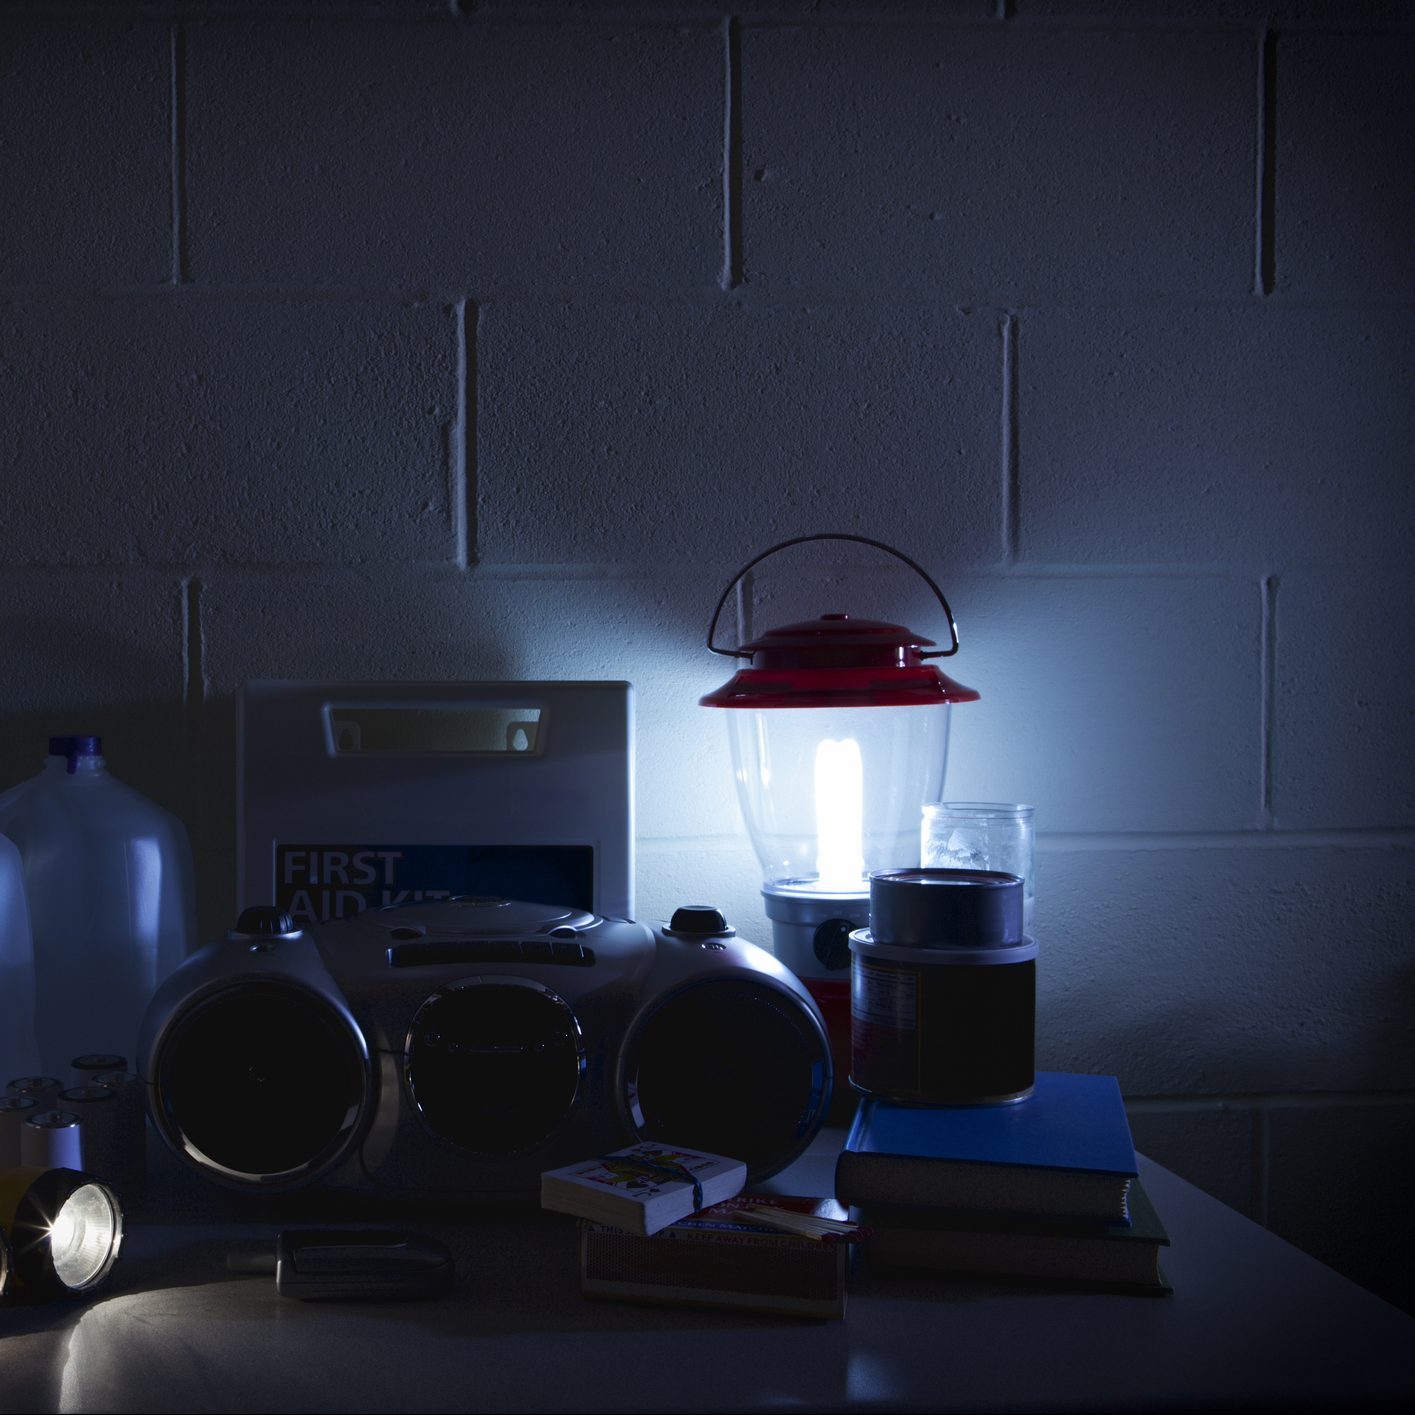 Power Outage Kit with Emergency Lantern for a Blackout at Home